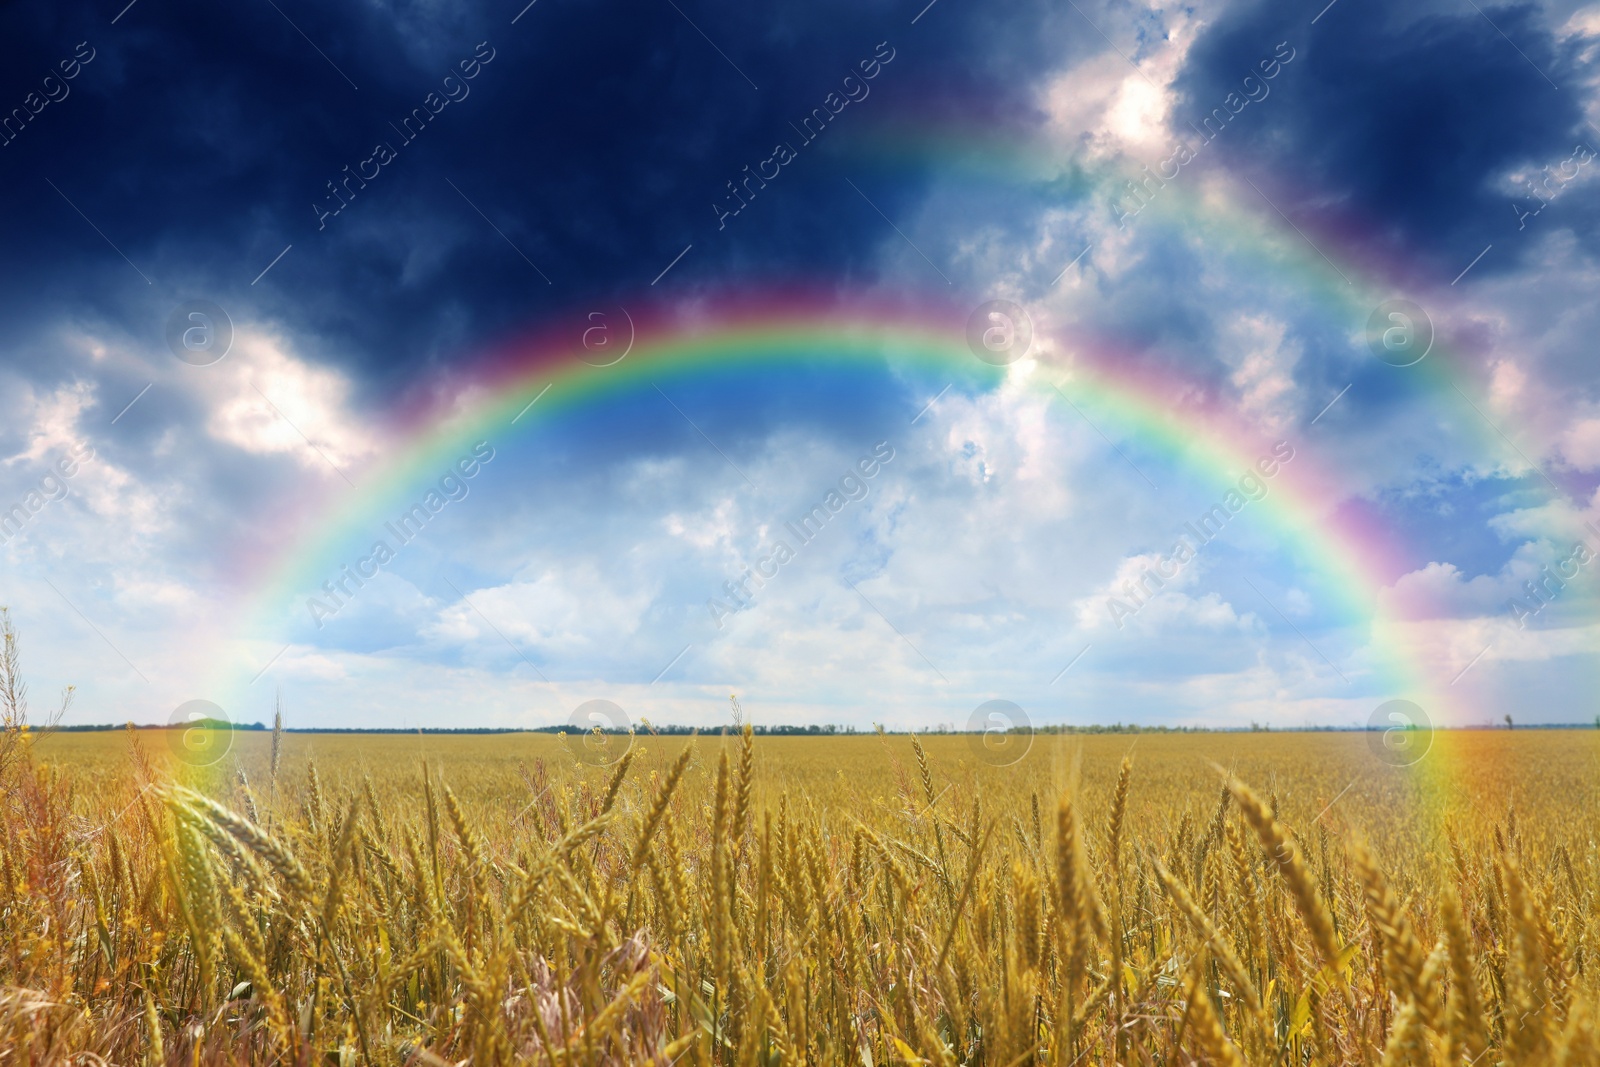 Image of Amazing double rainbow over wheat field under stormy sky